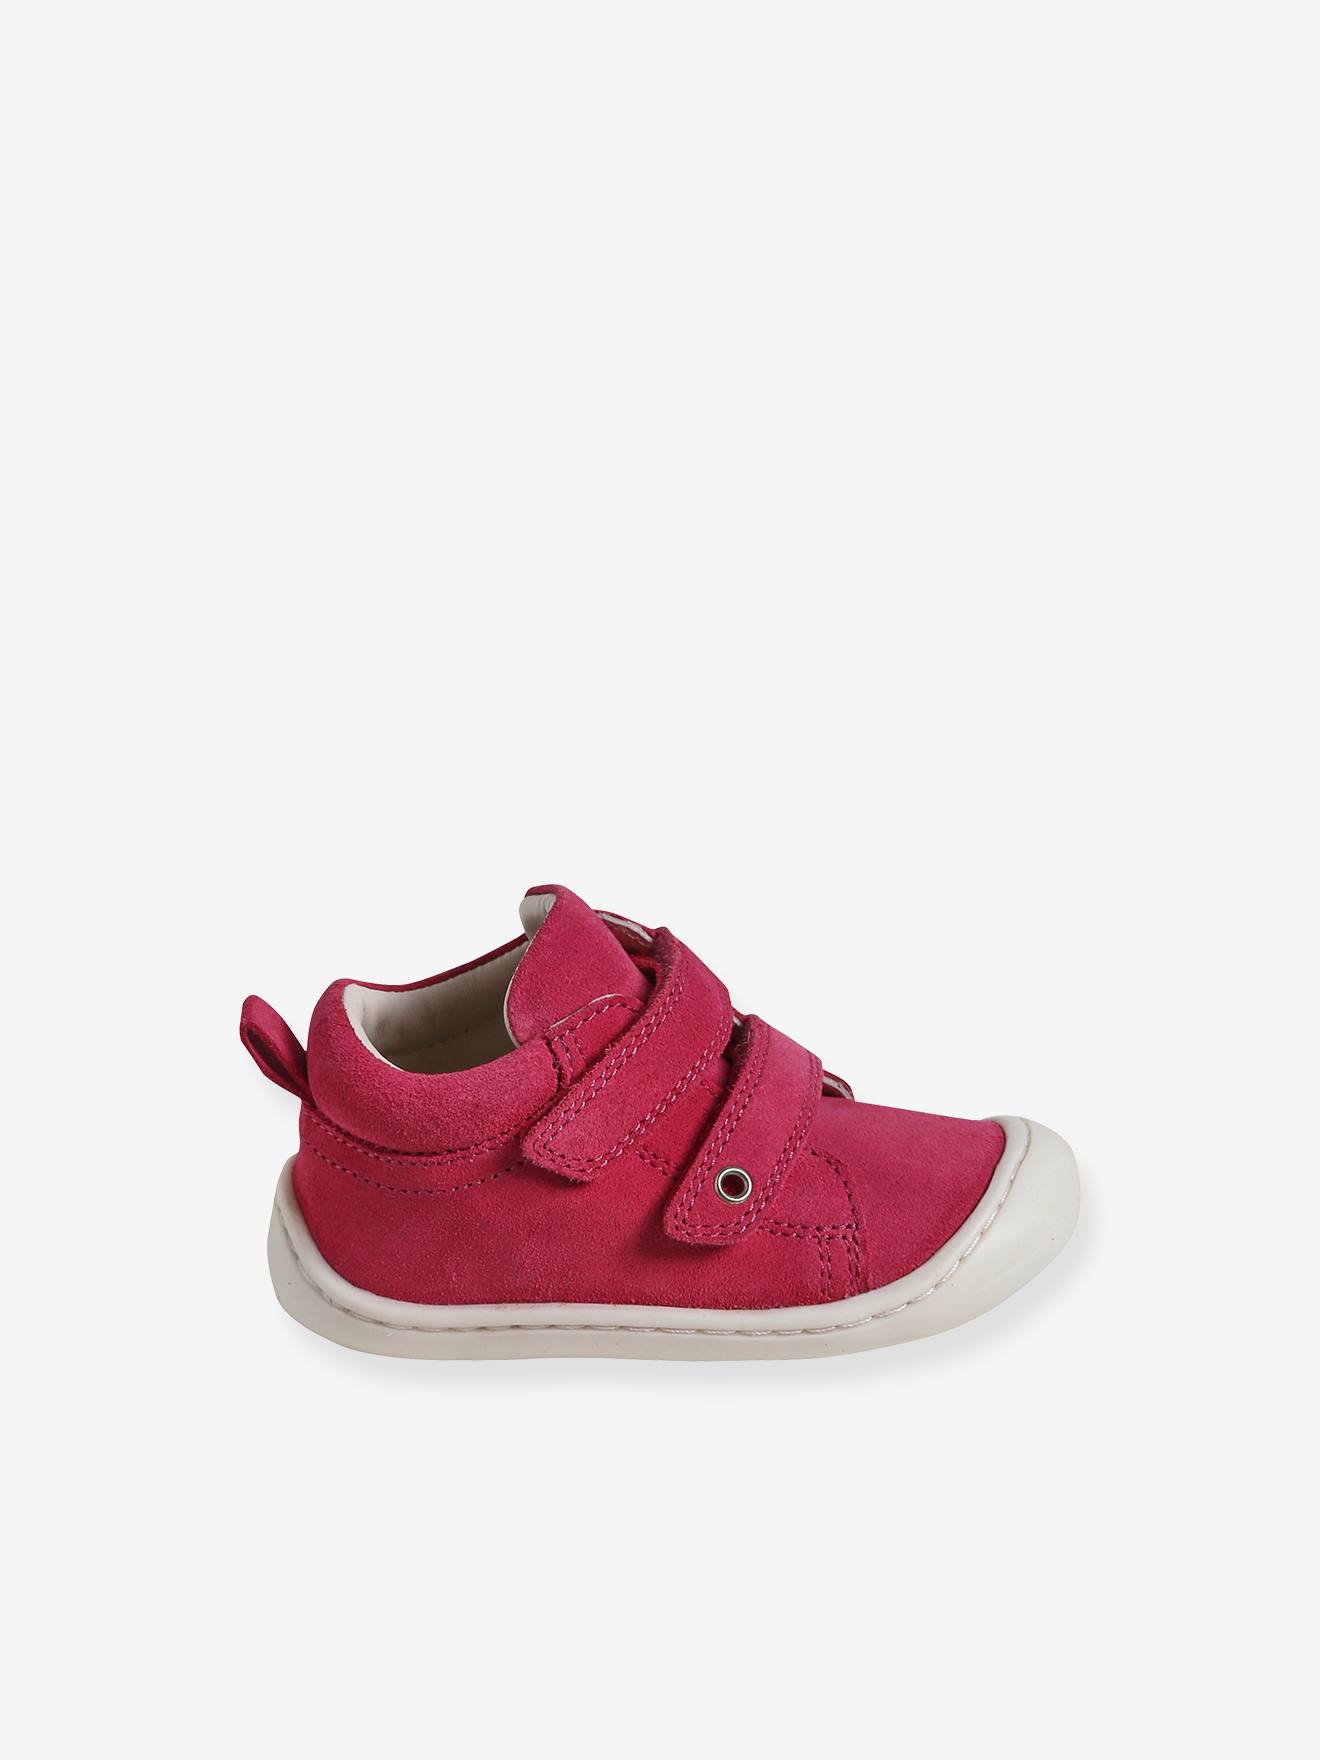 Pram Shoes in Soft Leather, Hook&Loop Strap, for Babies, Designed for  Crawling - rose, Shoes